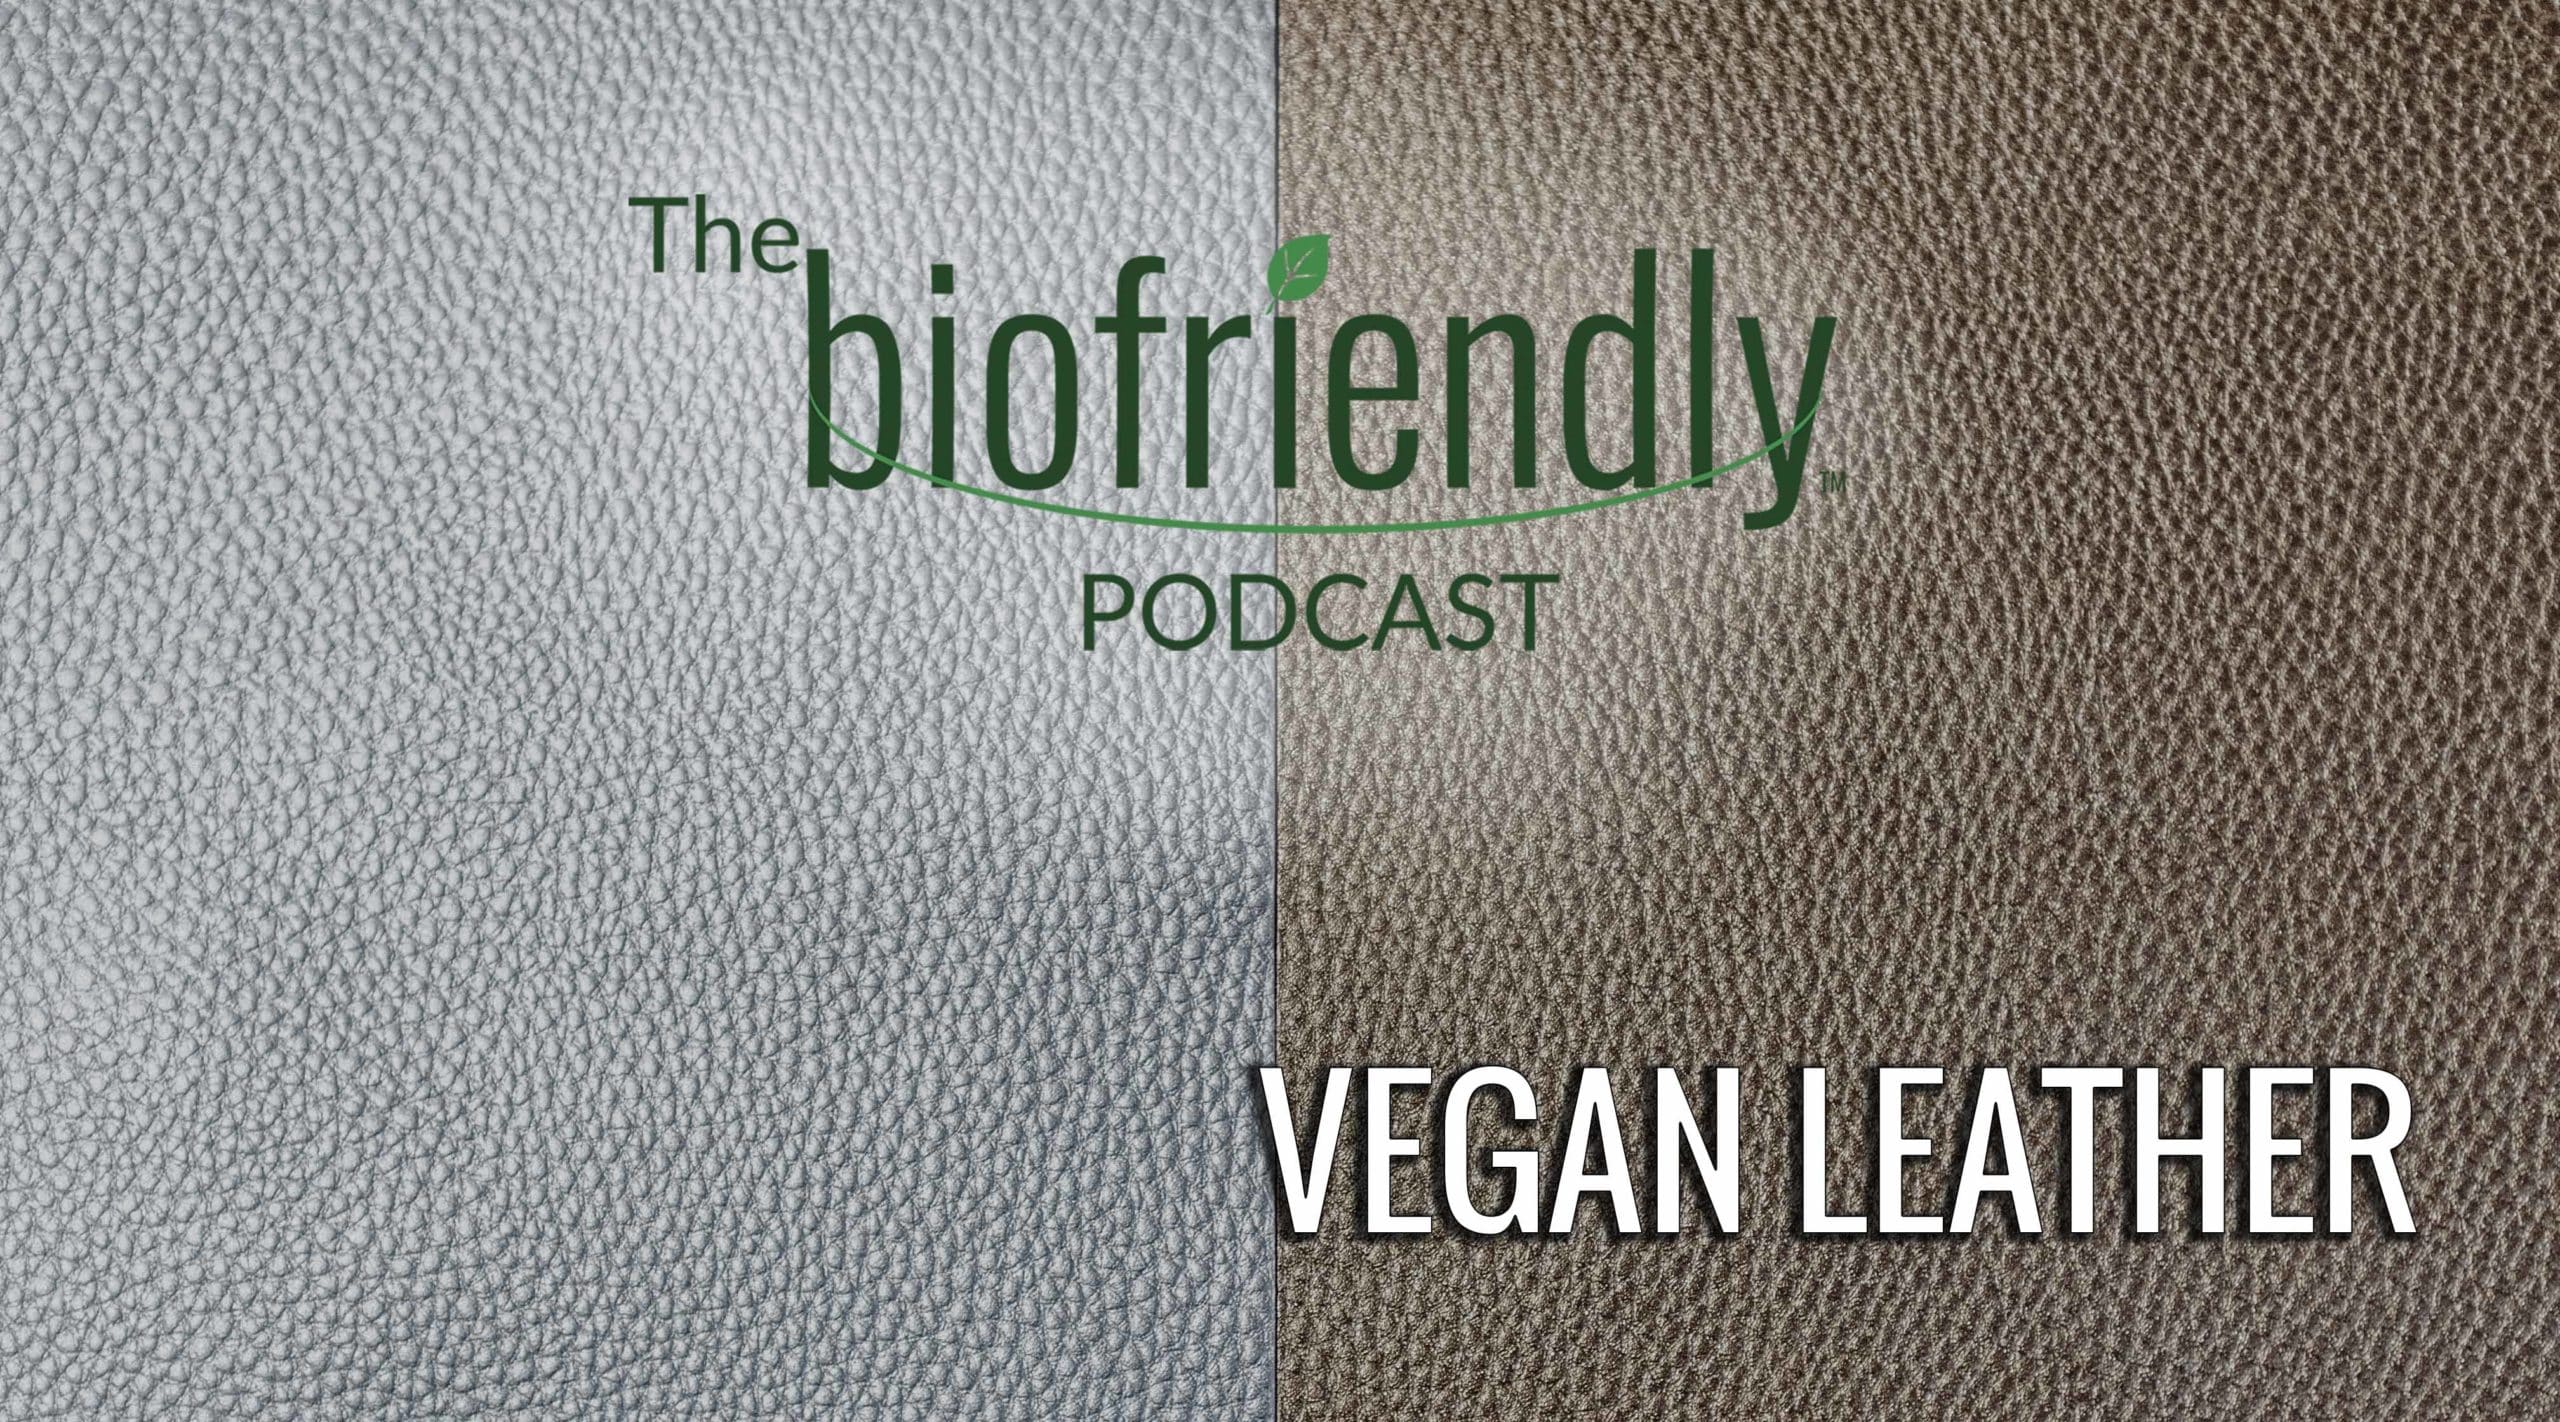 The Biofriendly Podcast - Episode 77 - Vegan Leather